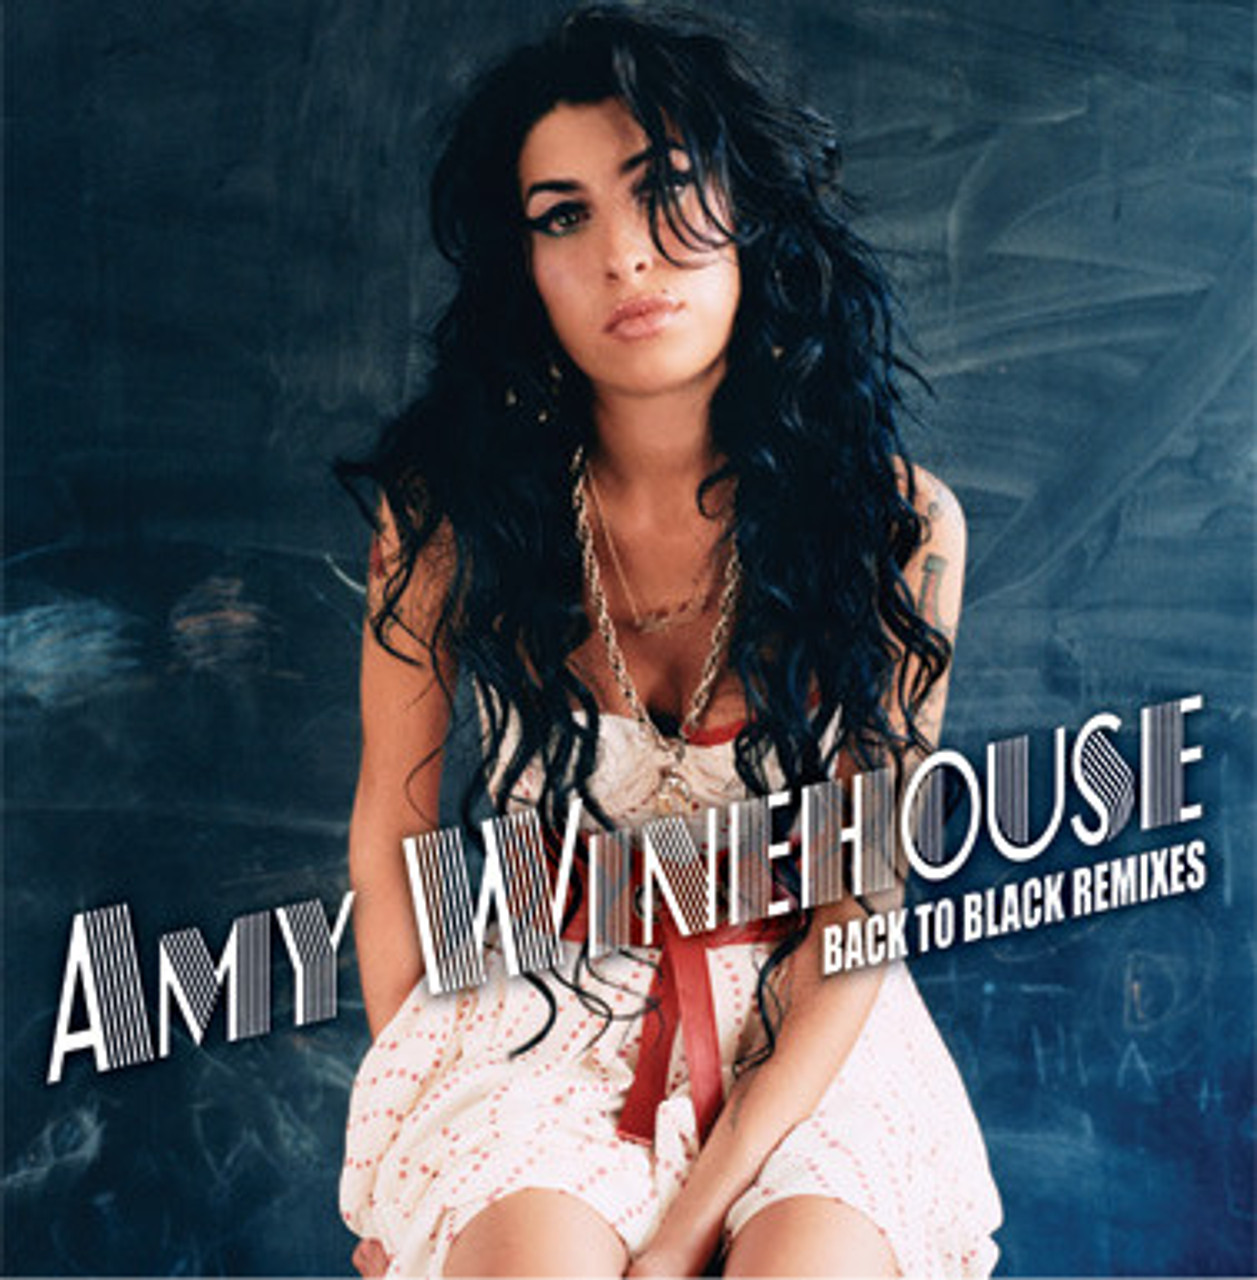 AMY WINEHOUSE Back to Black Remixes New DBL COLORED VINYL LP